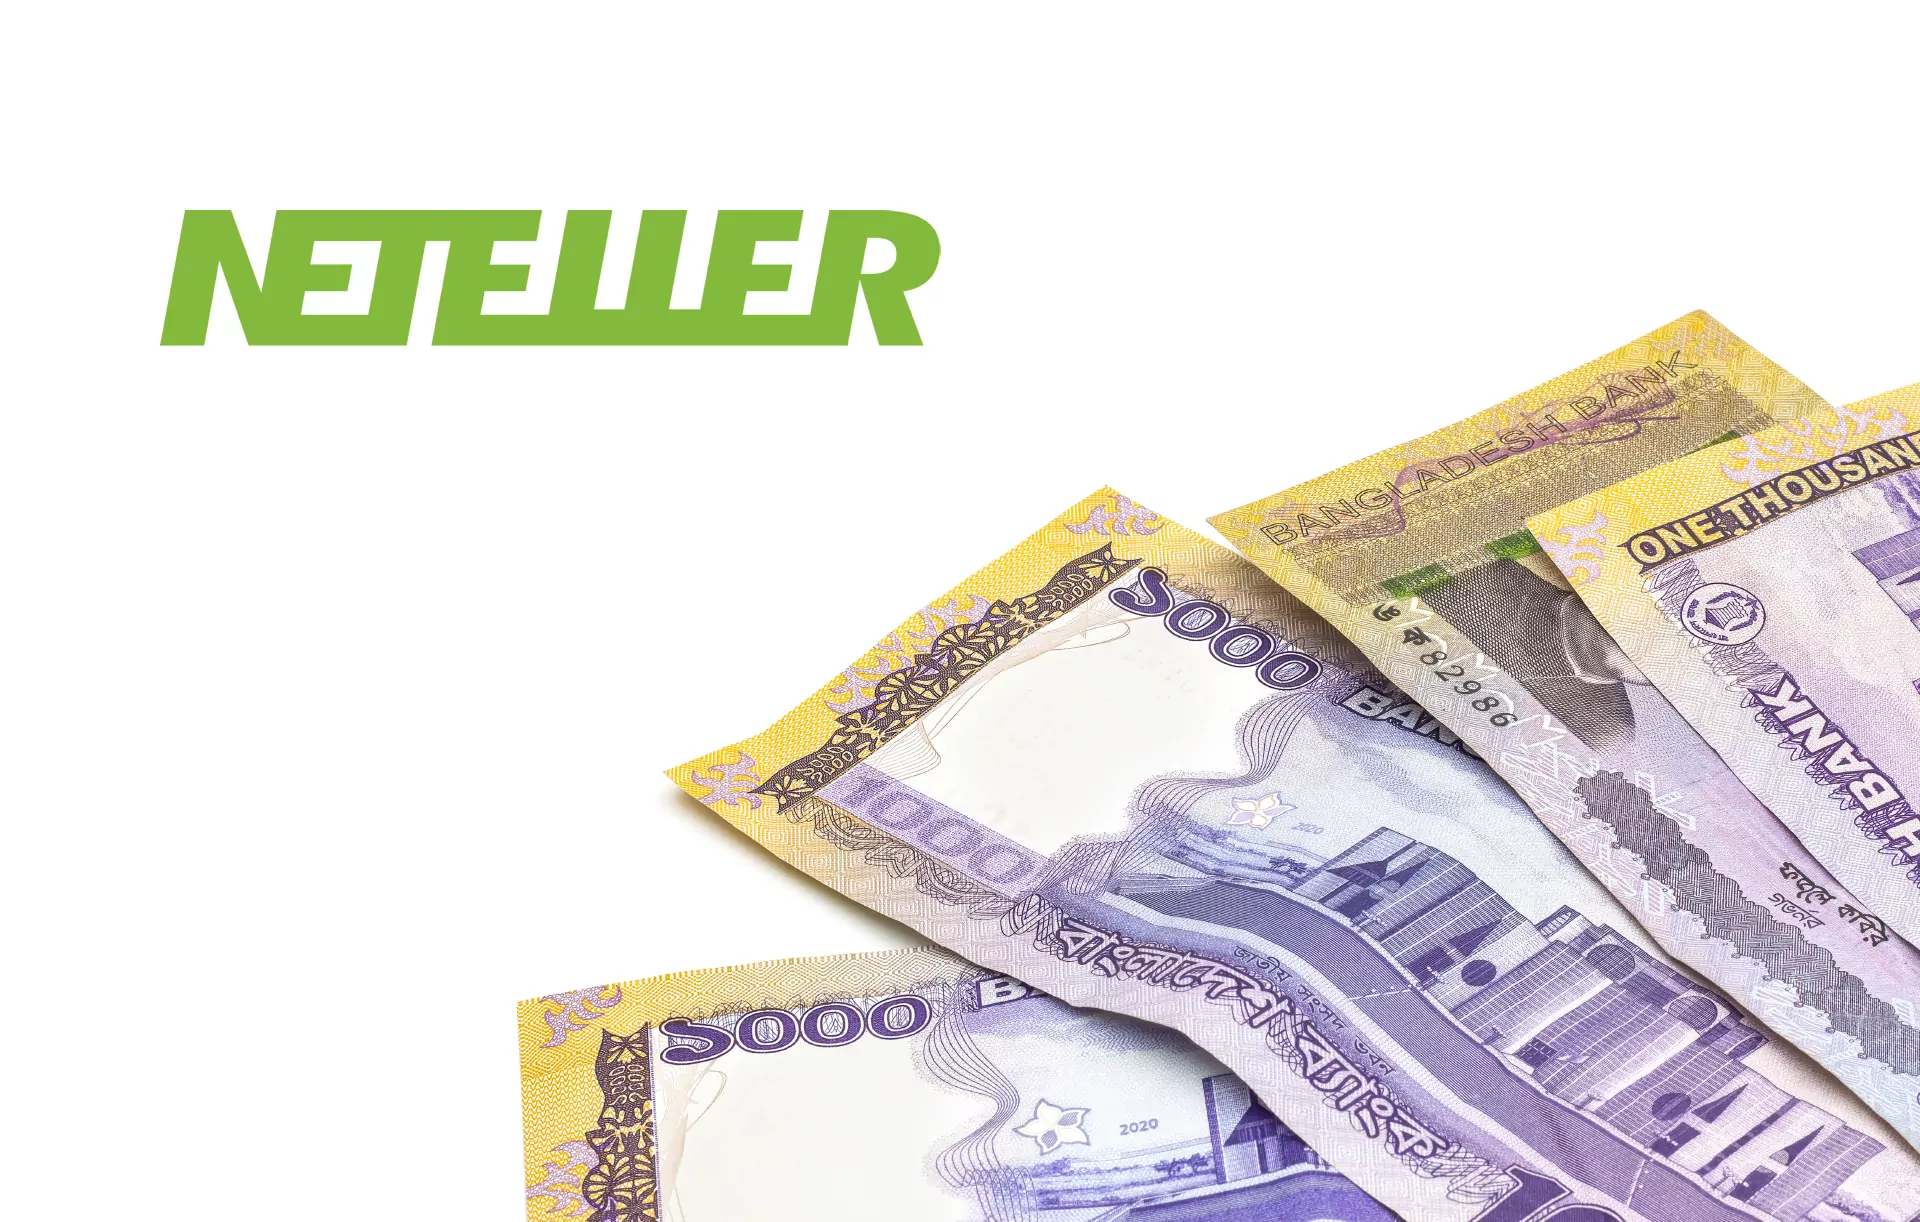 Neteller is another e-wallet system that is quite popular among bookmakers' payment methods.